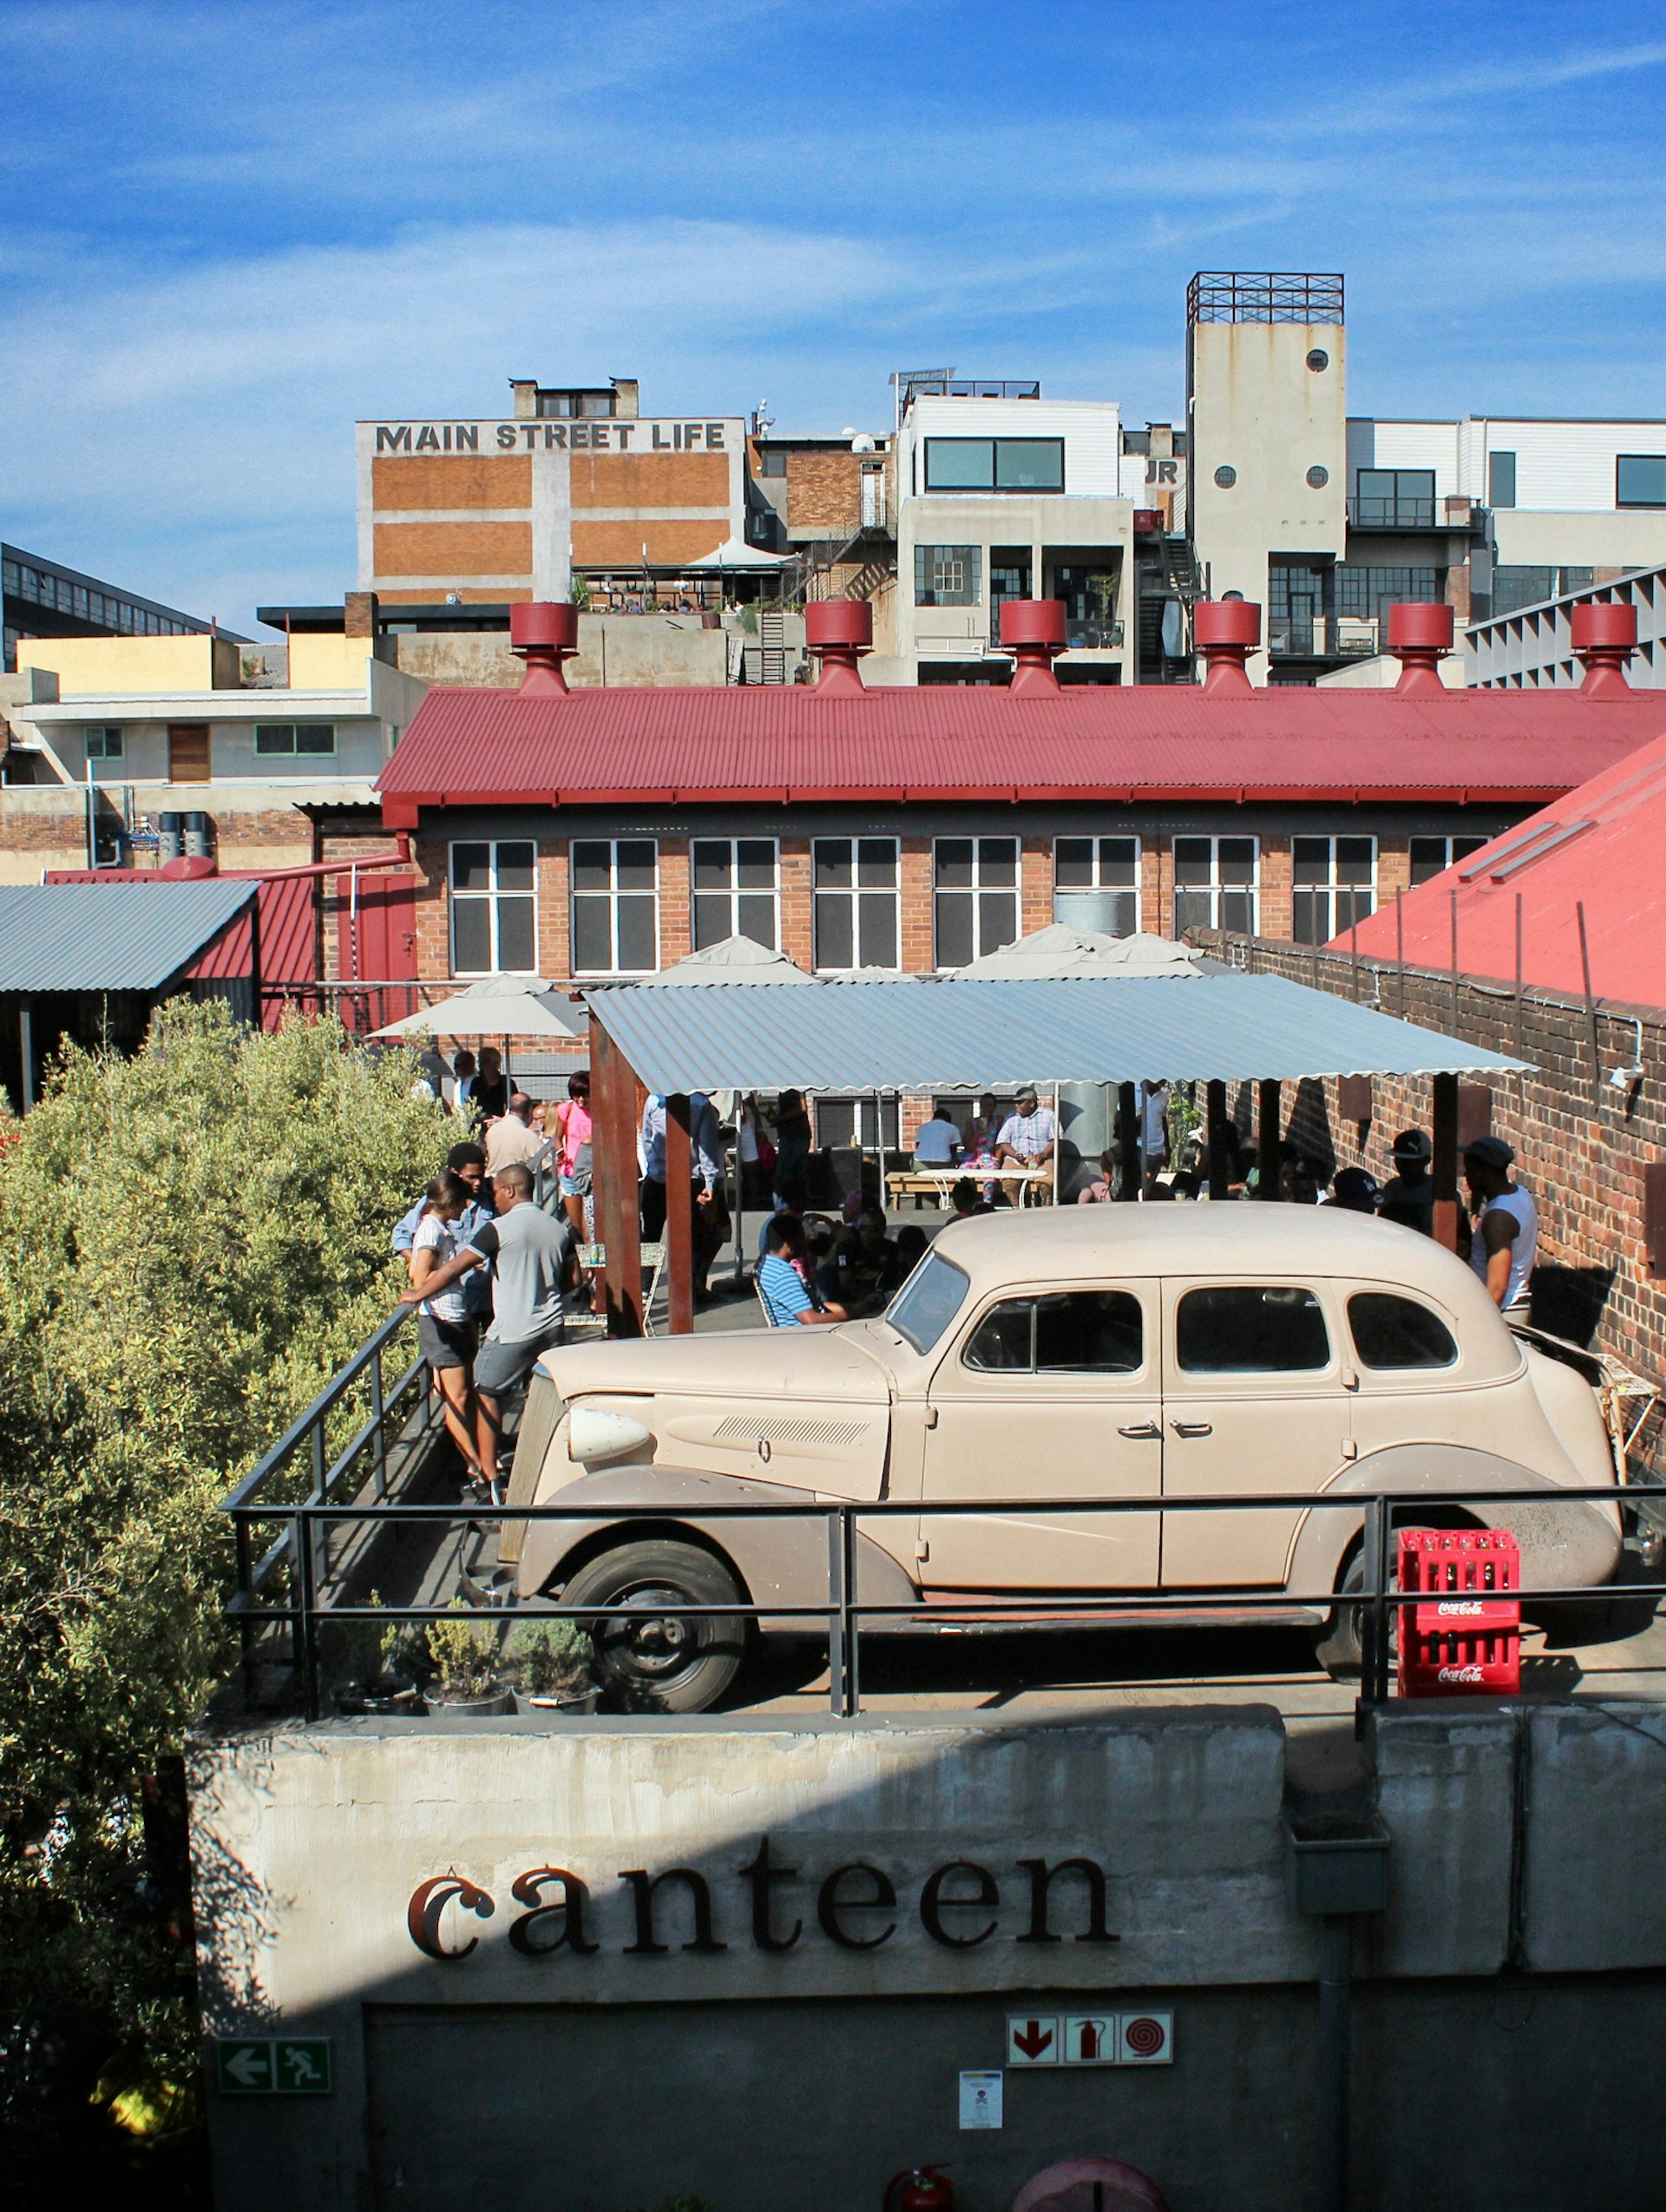 A crowd gathers under an awning on the flat roof of Market on Main, sharing the space is a vintage 1930s car. Trees climb up to this level on the left and renovated old industrial buildings back the scene ©Antonella Ragazzoni / 500px